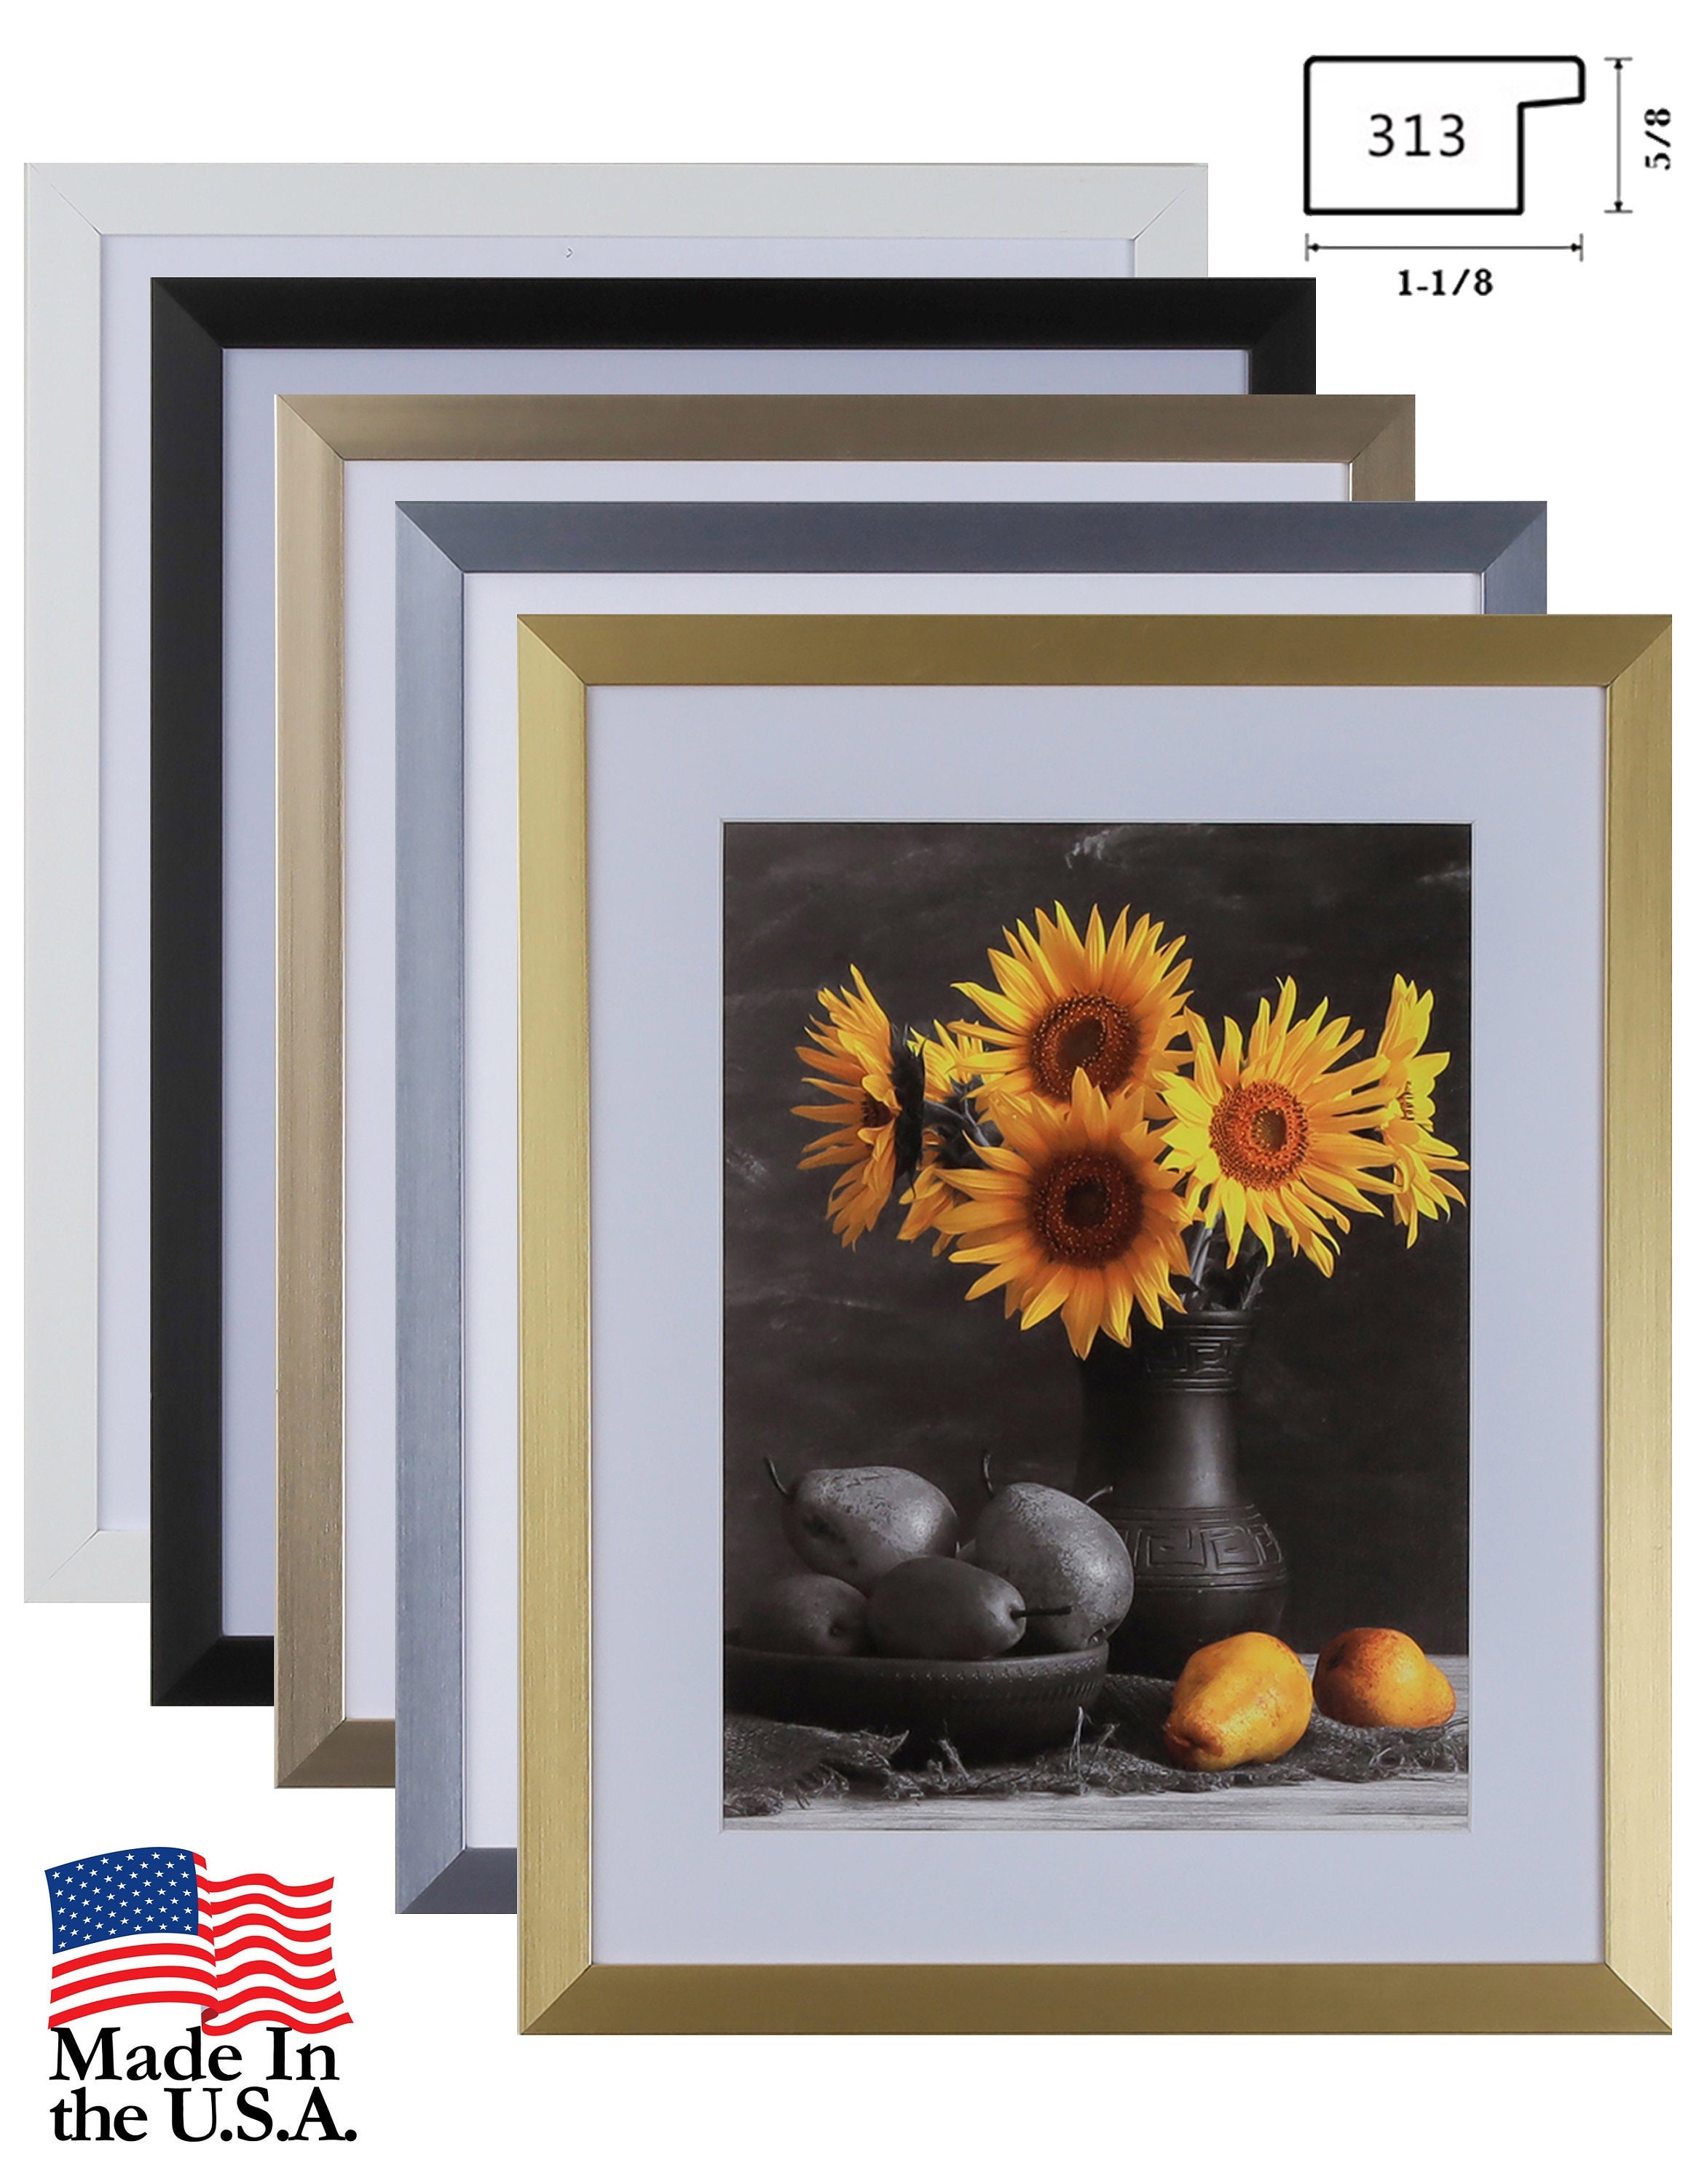 1-1/8 Polystyrene Best Seller Modern 30x40 Picture Frame. Multiple Colors  by Wholesaleartsframes-com 313-VI Series. Made in USA 